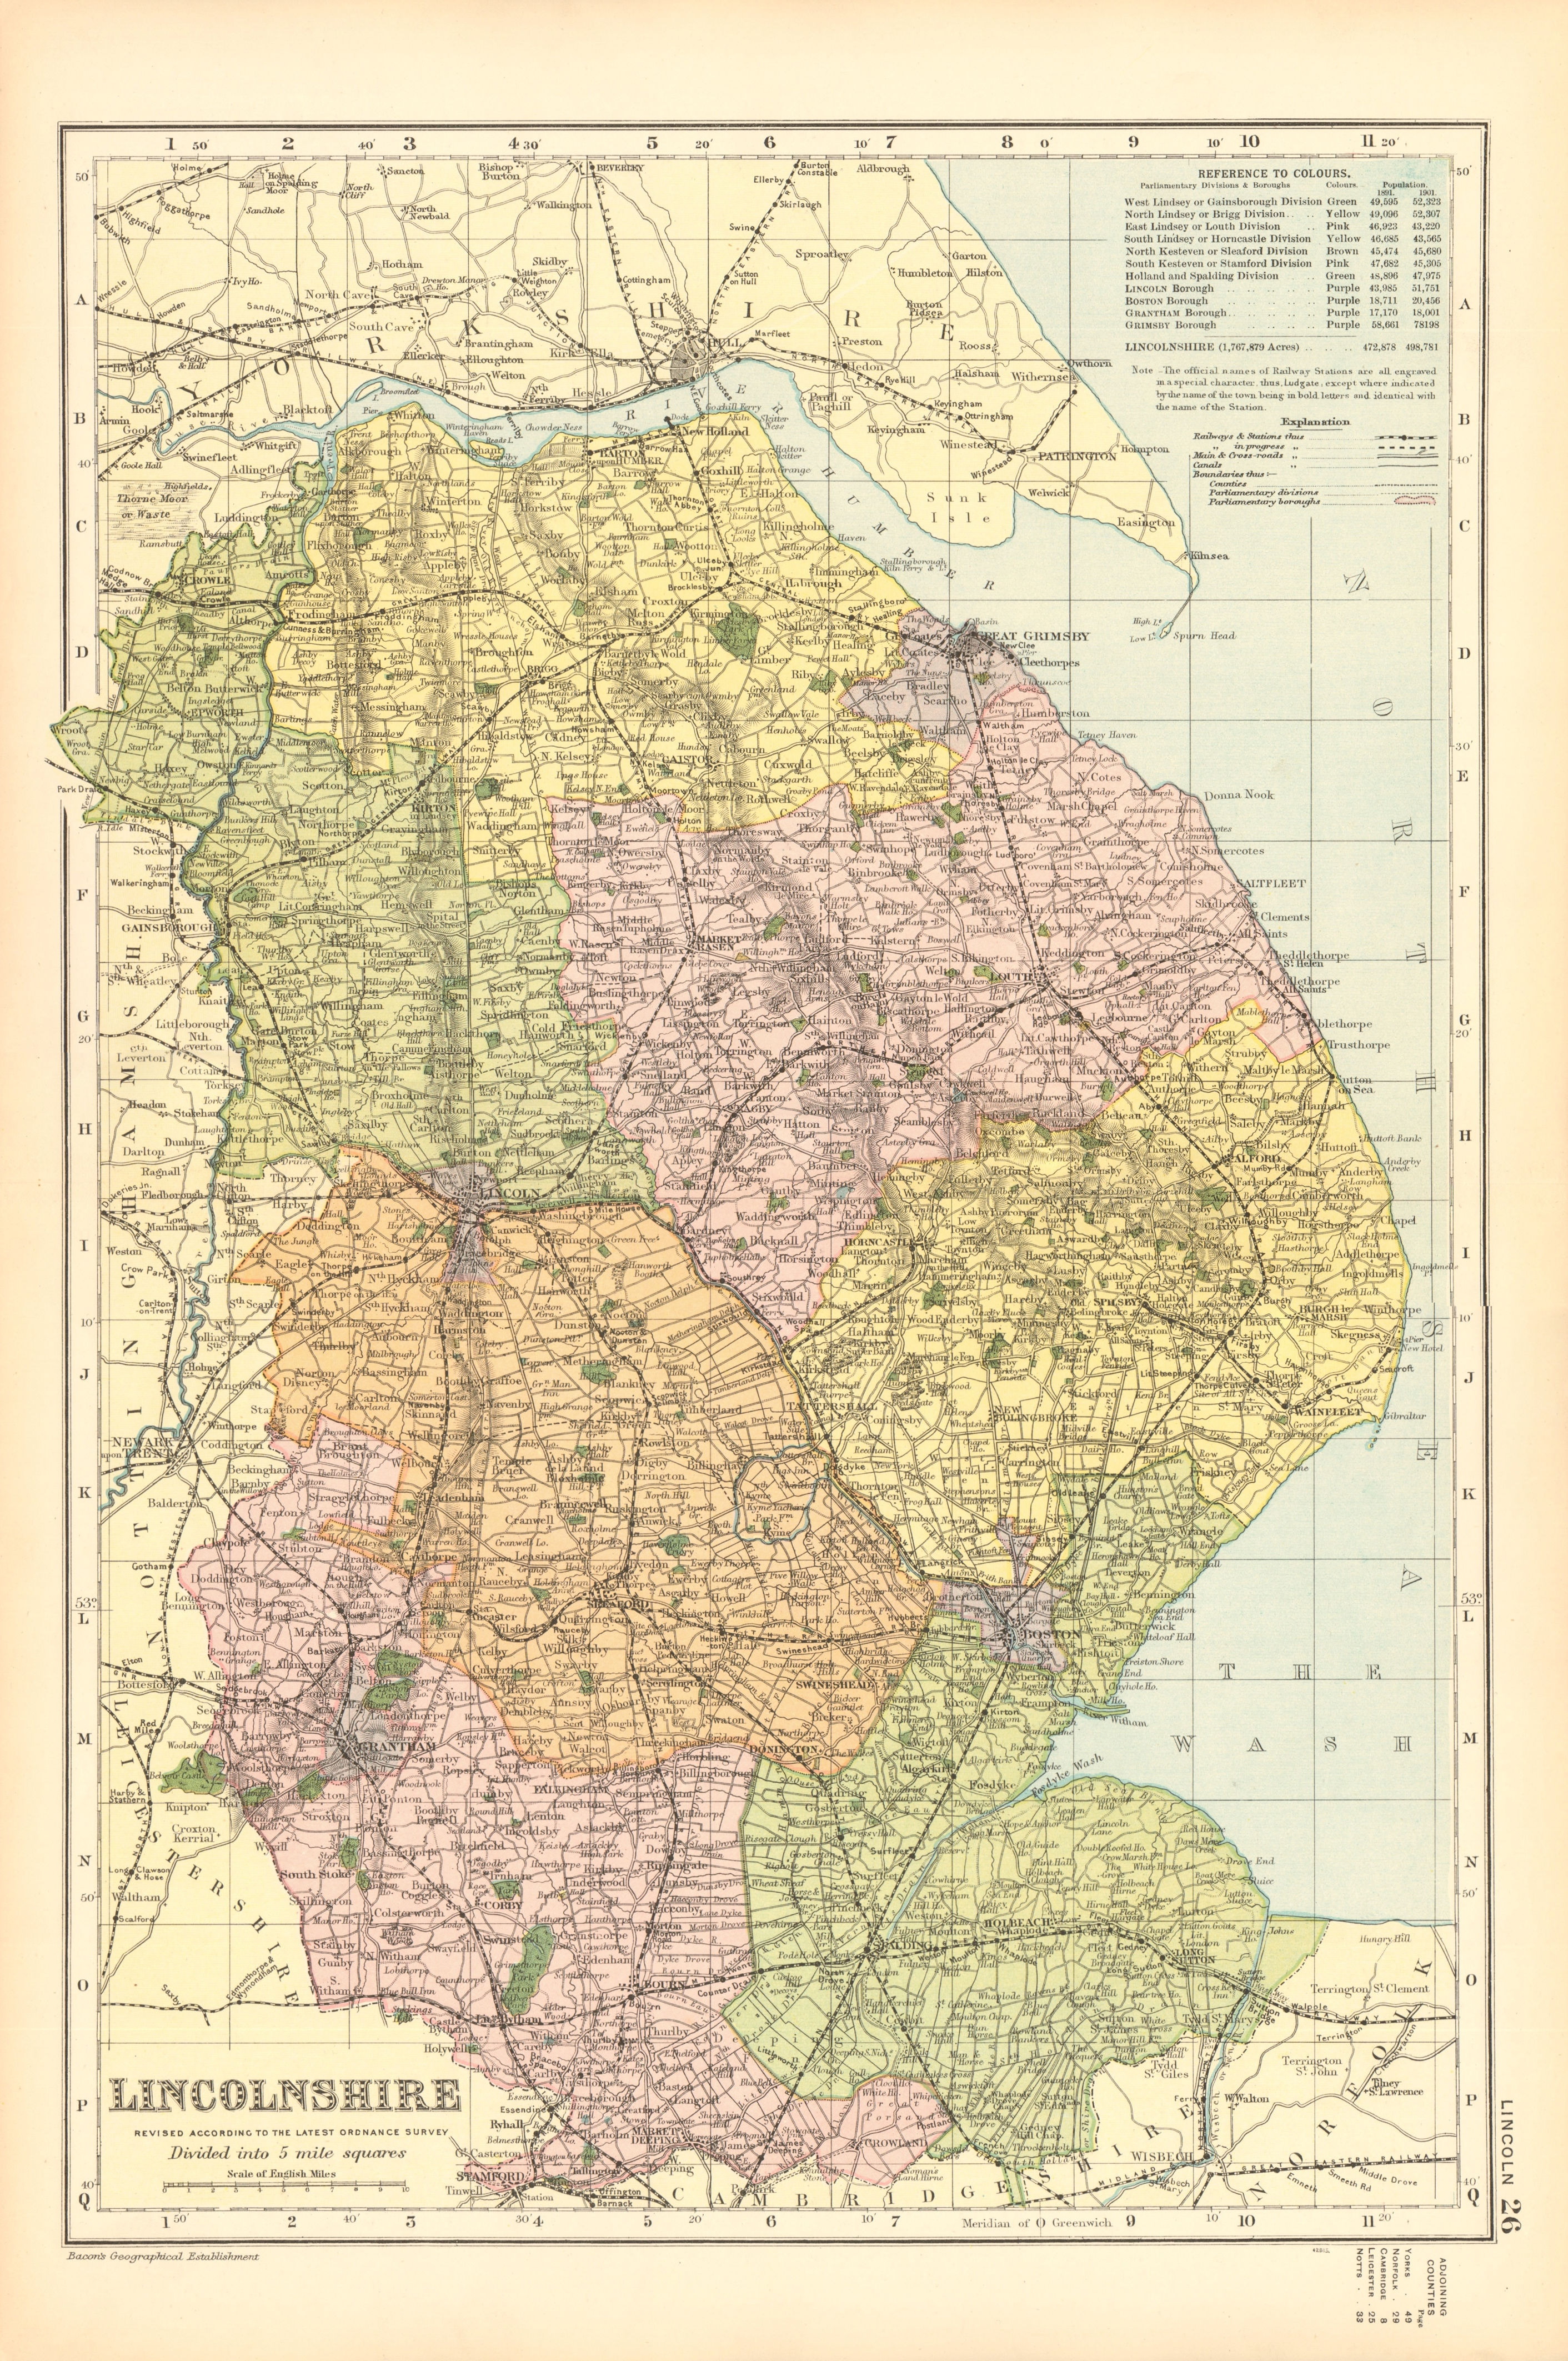 Associate Product LINCOLNSHIRE. Showing Parliamentary divisions, boroughs & parks. BACON 1904 map